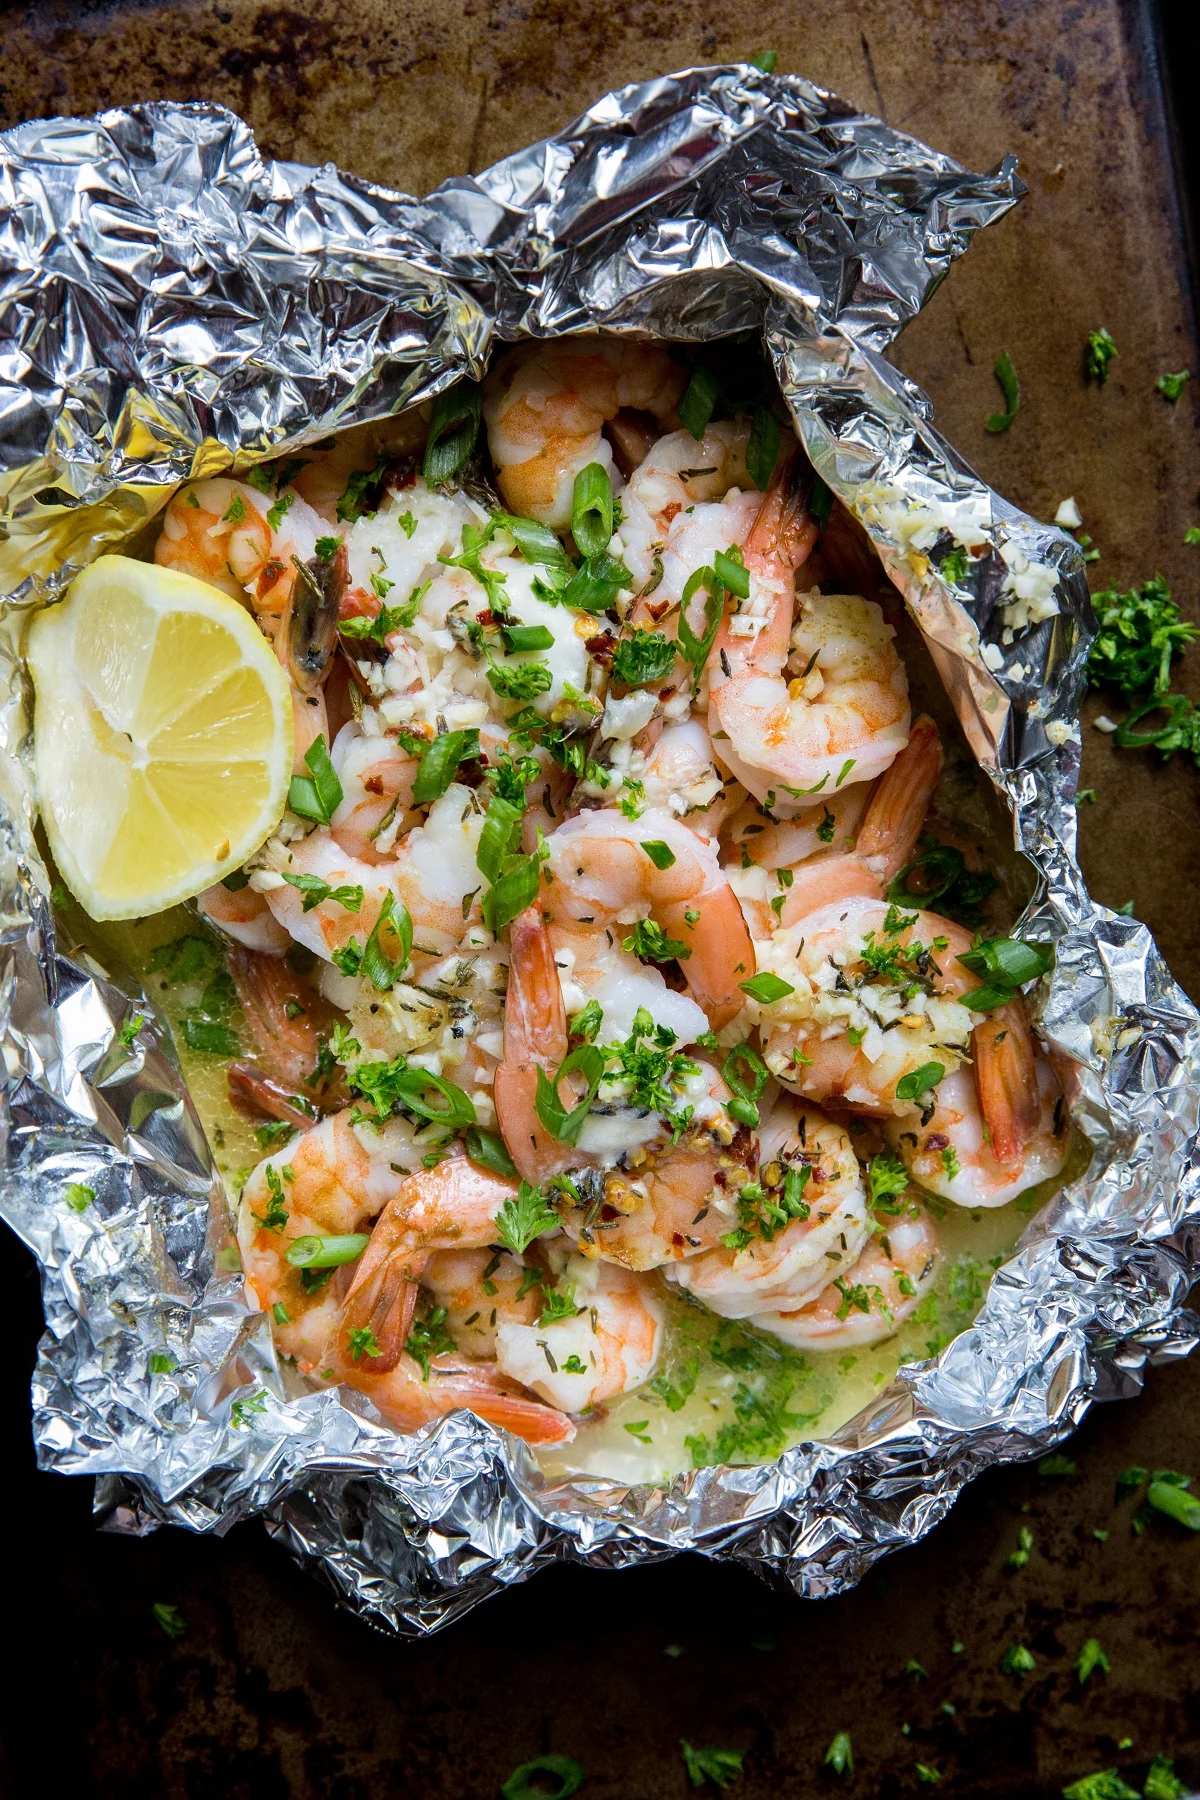 How to Grill Shrimp in Foil Packets. Shrimp foil packet on a baking sheet with fresh herbs sprinkled around.